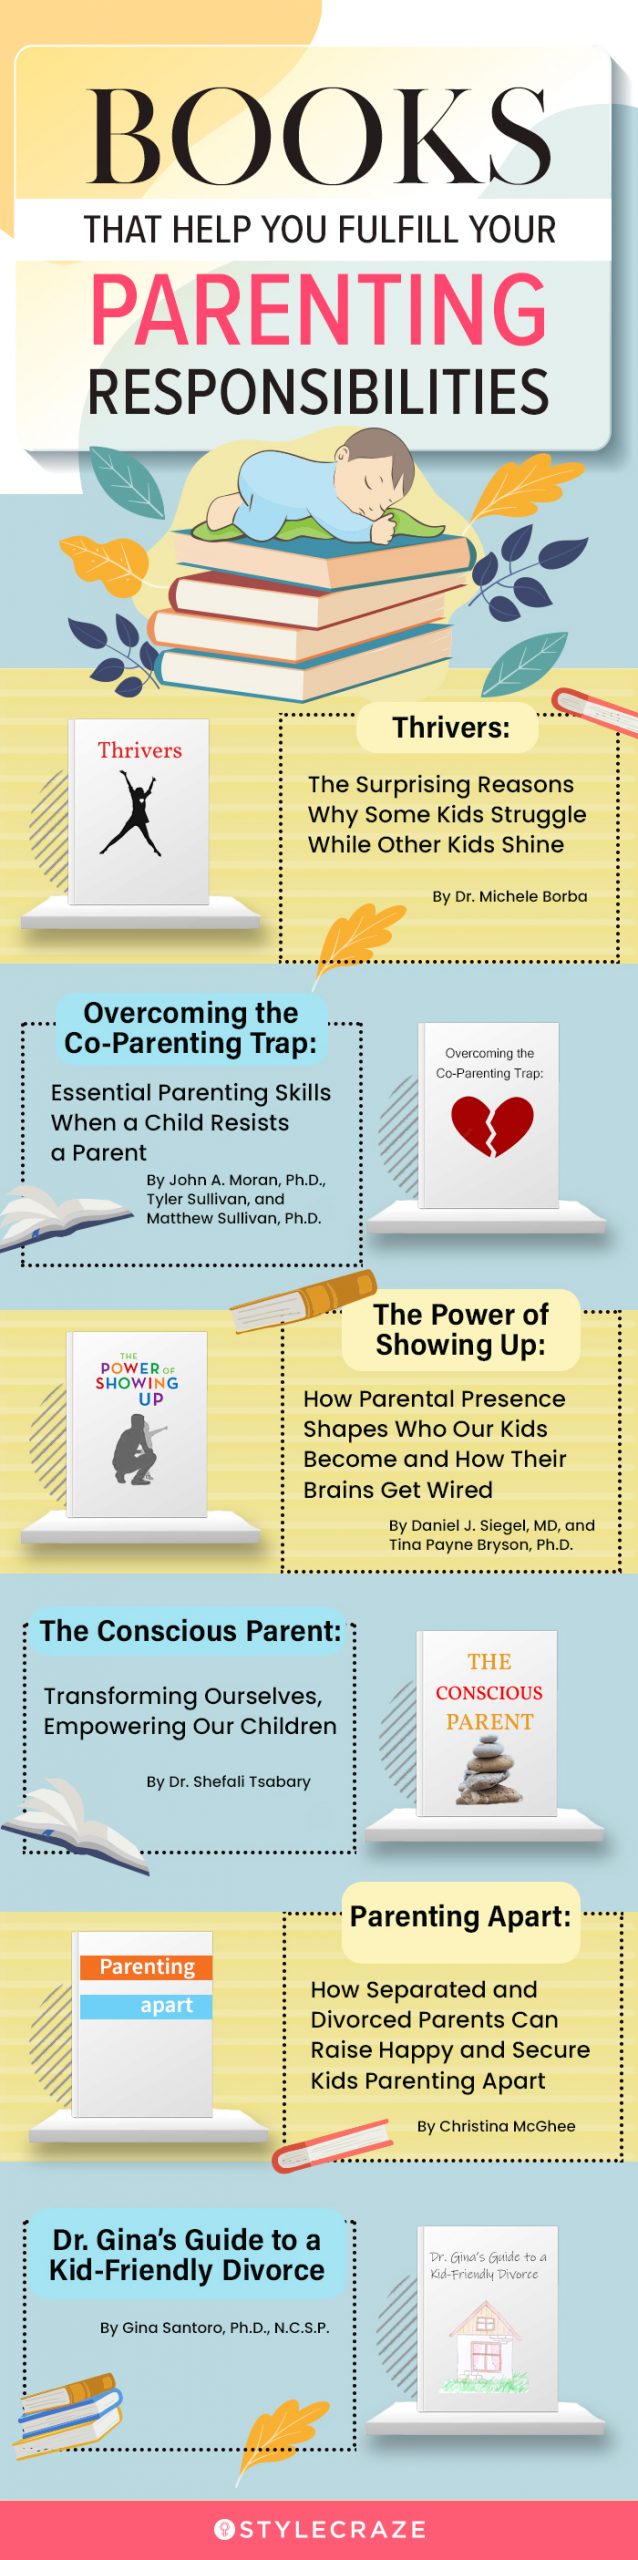 books that help you fulfill your parenting responsibilities [infographic]